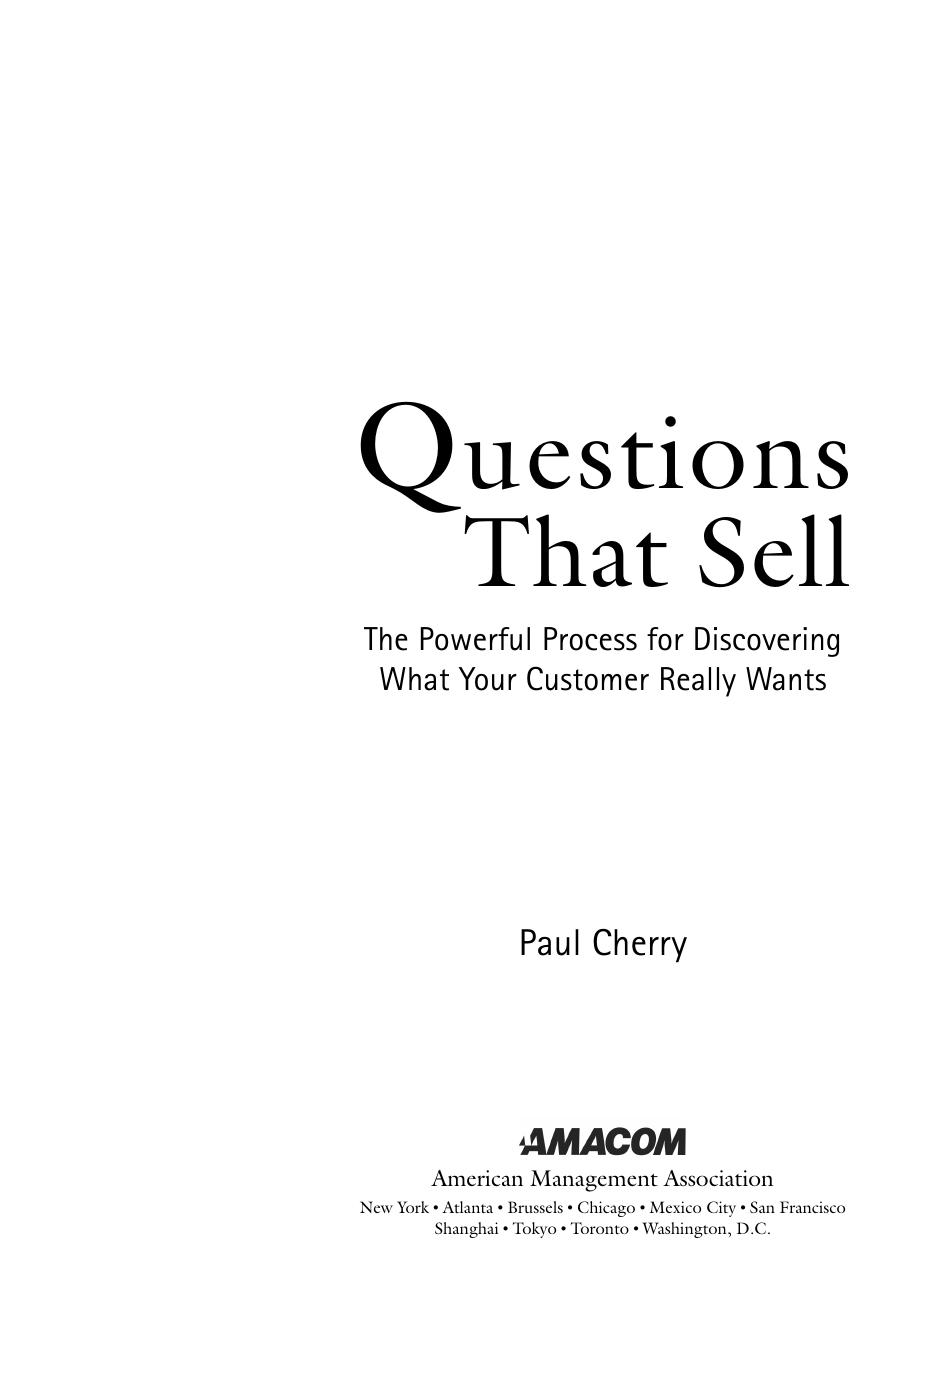 Questions That Sell: The Powerful Process for Discovering What Your Customer Really Wants by Paul Cherry